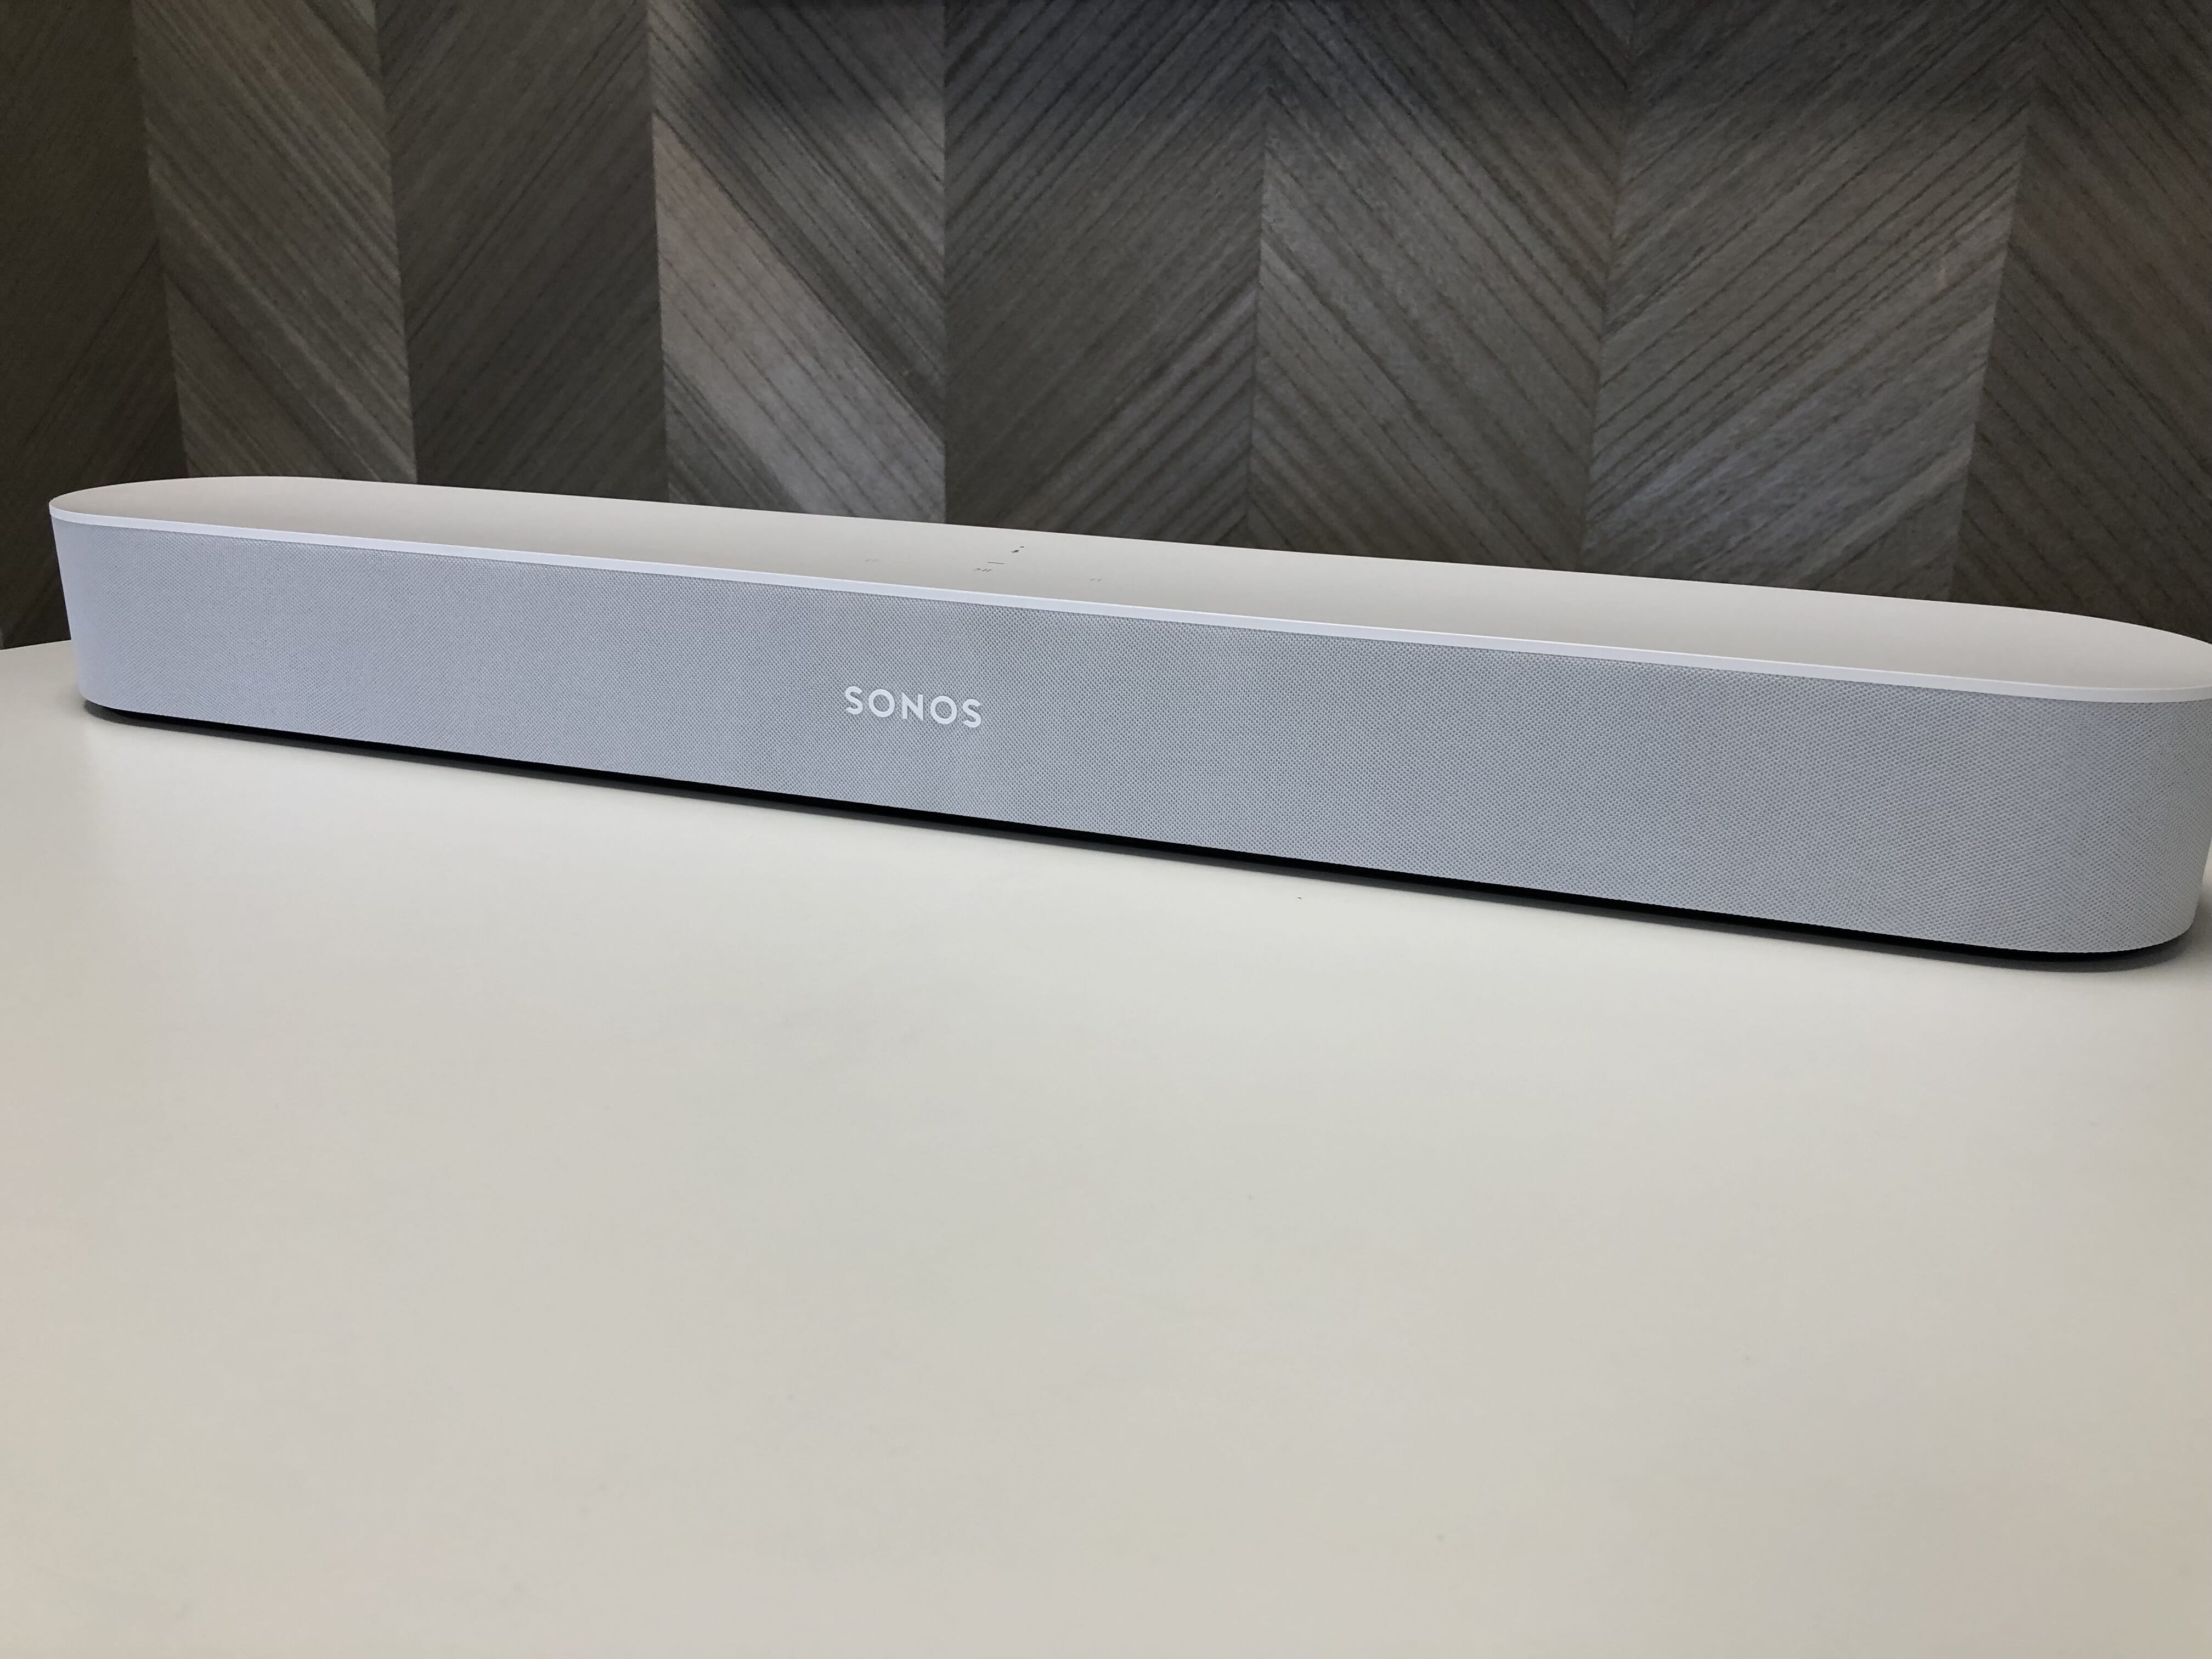 fodbold Tryk ned beslag 10 Cool Features about the Sonos Beam you'll Love | Smart Home Sounds